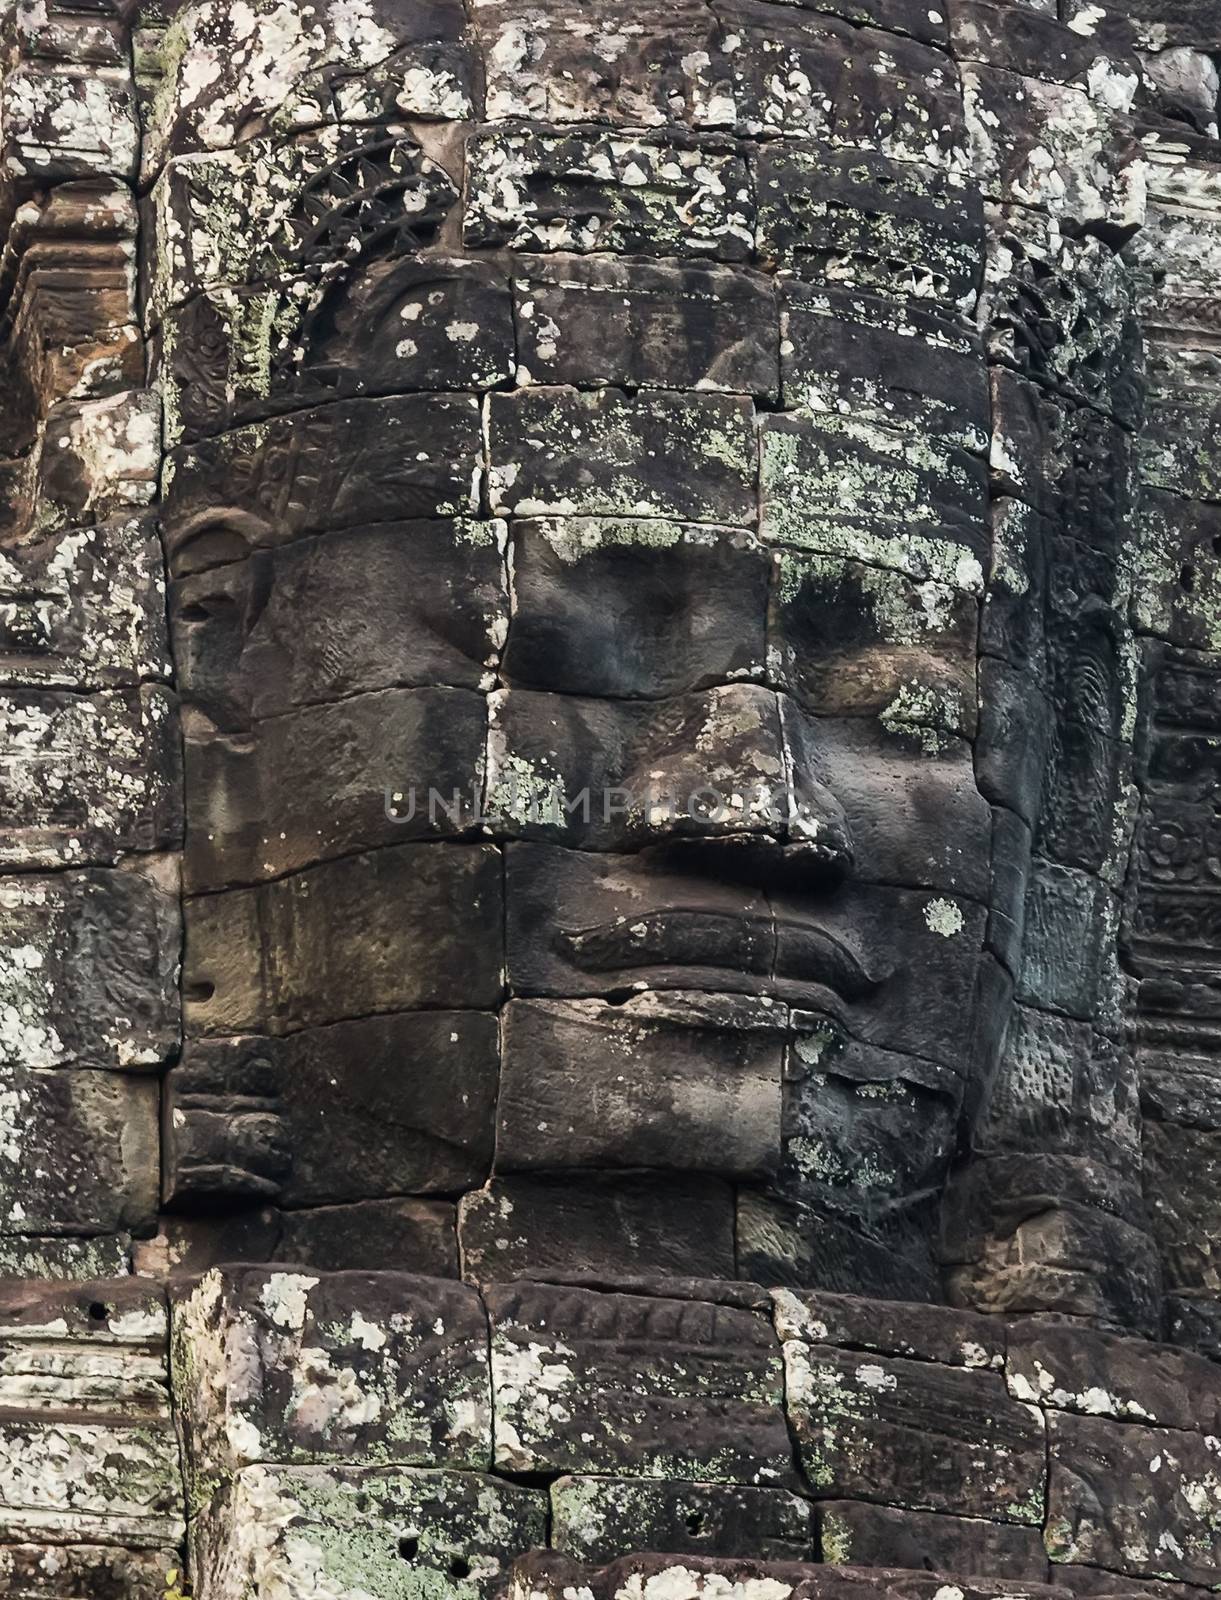 Stone smiling Faces of king Bayon Temple Angkor Thom, Cambodia. Ancient civilization monument Khmer architecture Kampuchea.